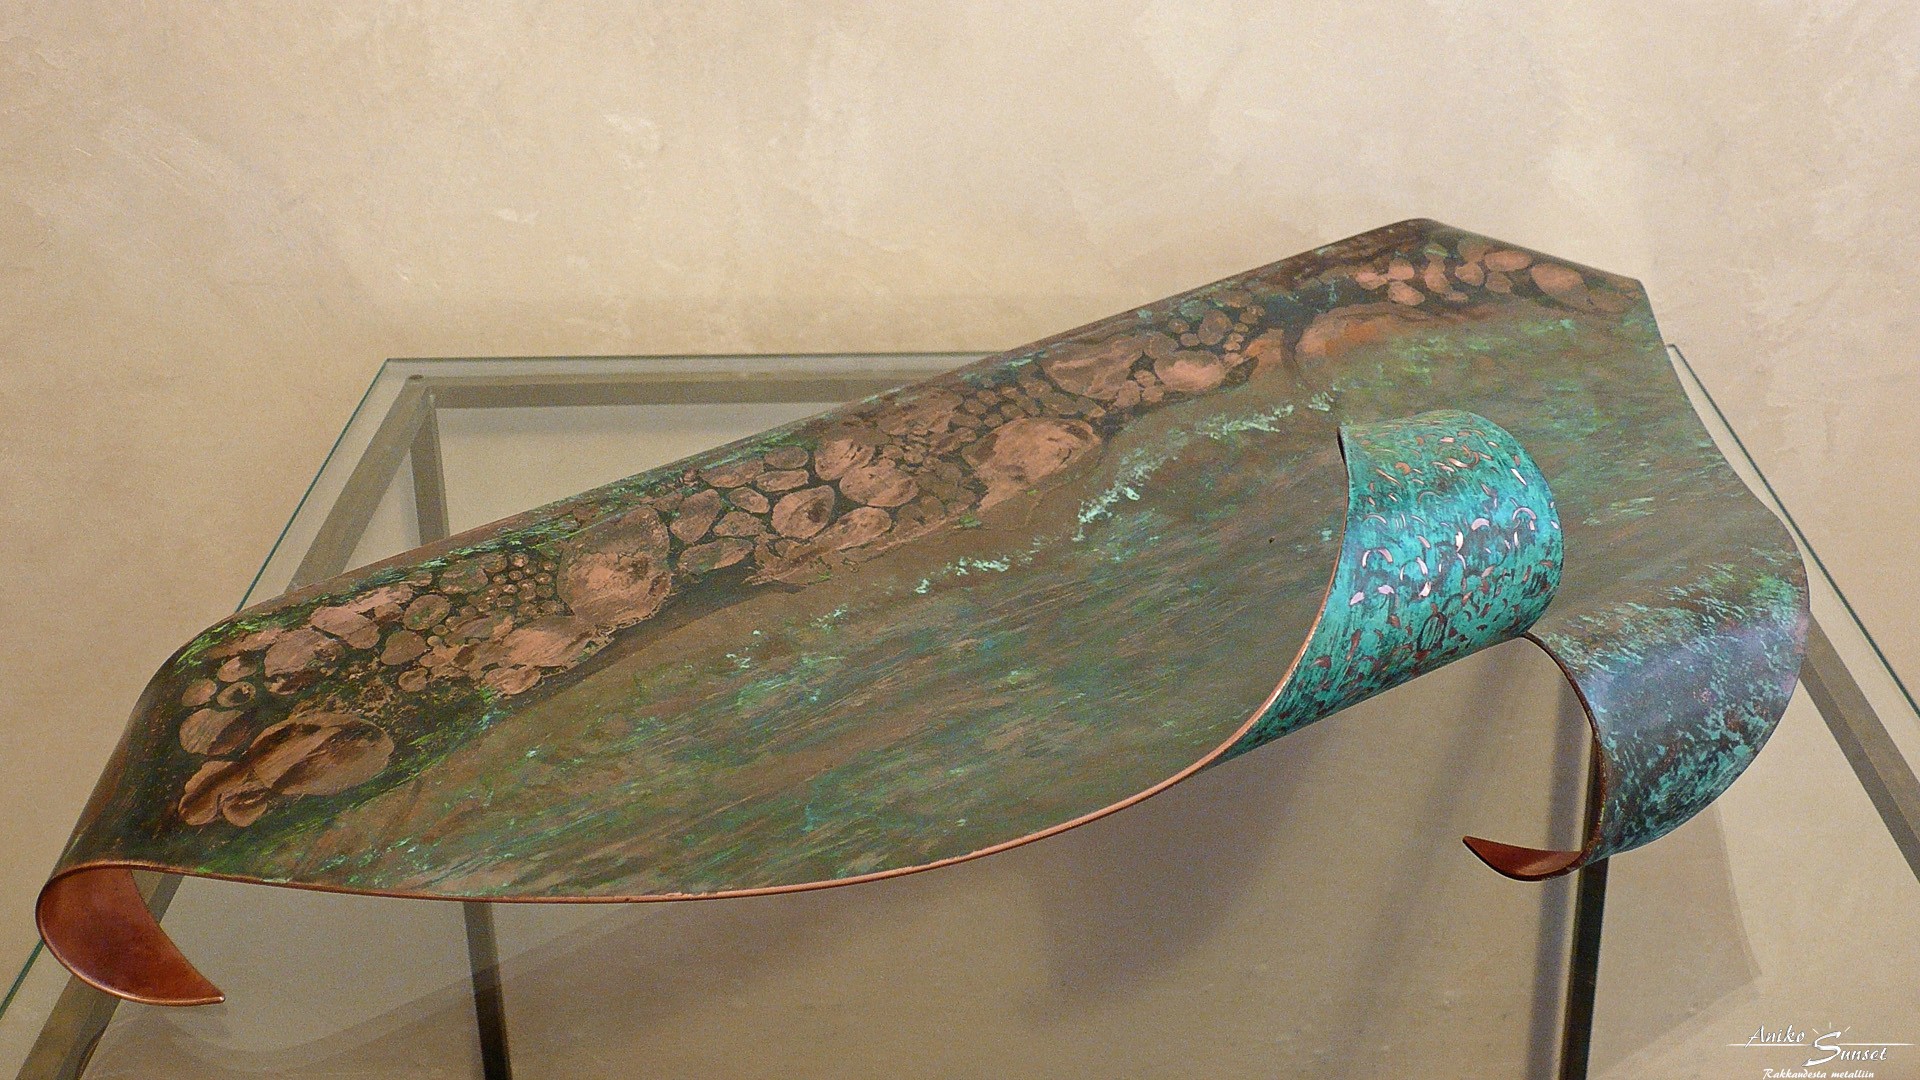 Platter "Rocky waterfront" - 2 mm copper sheet patinated using a special technique, 580x260 mm